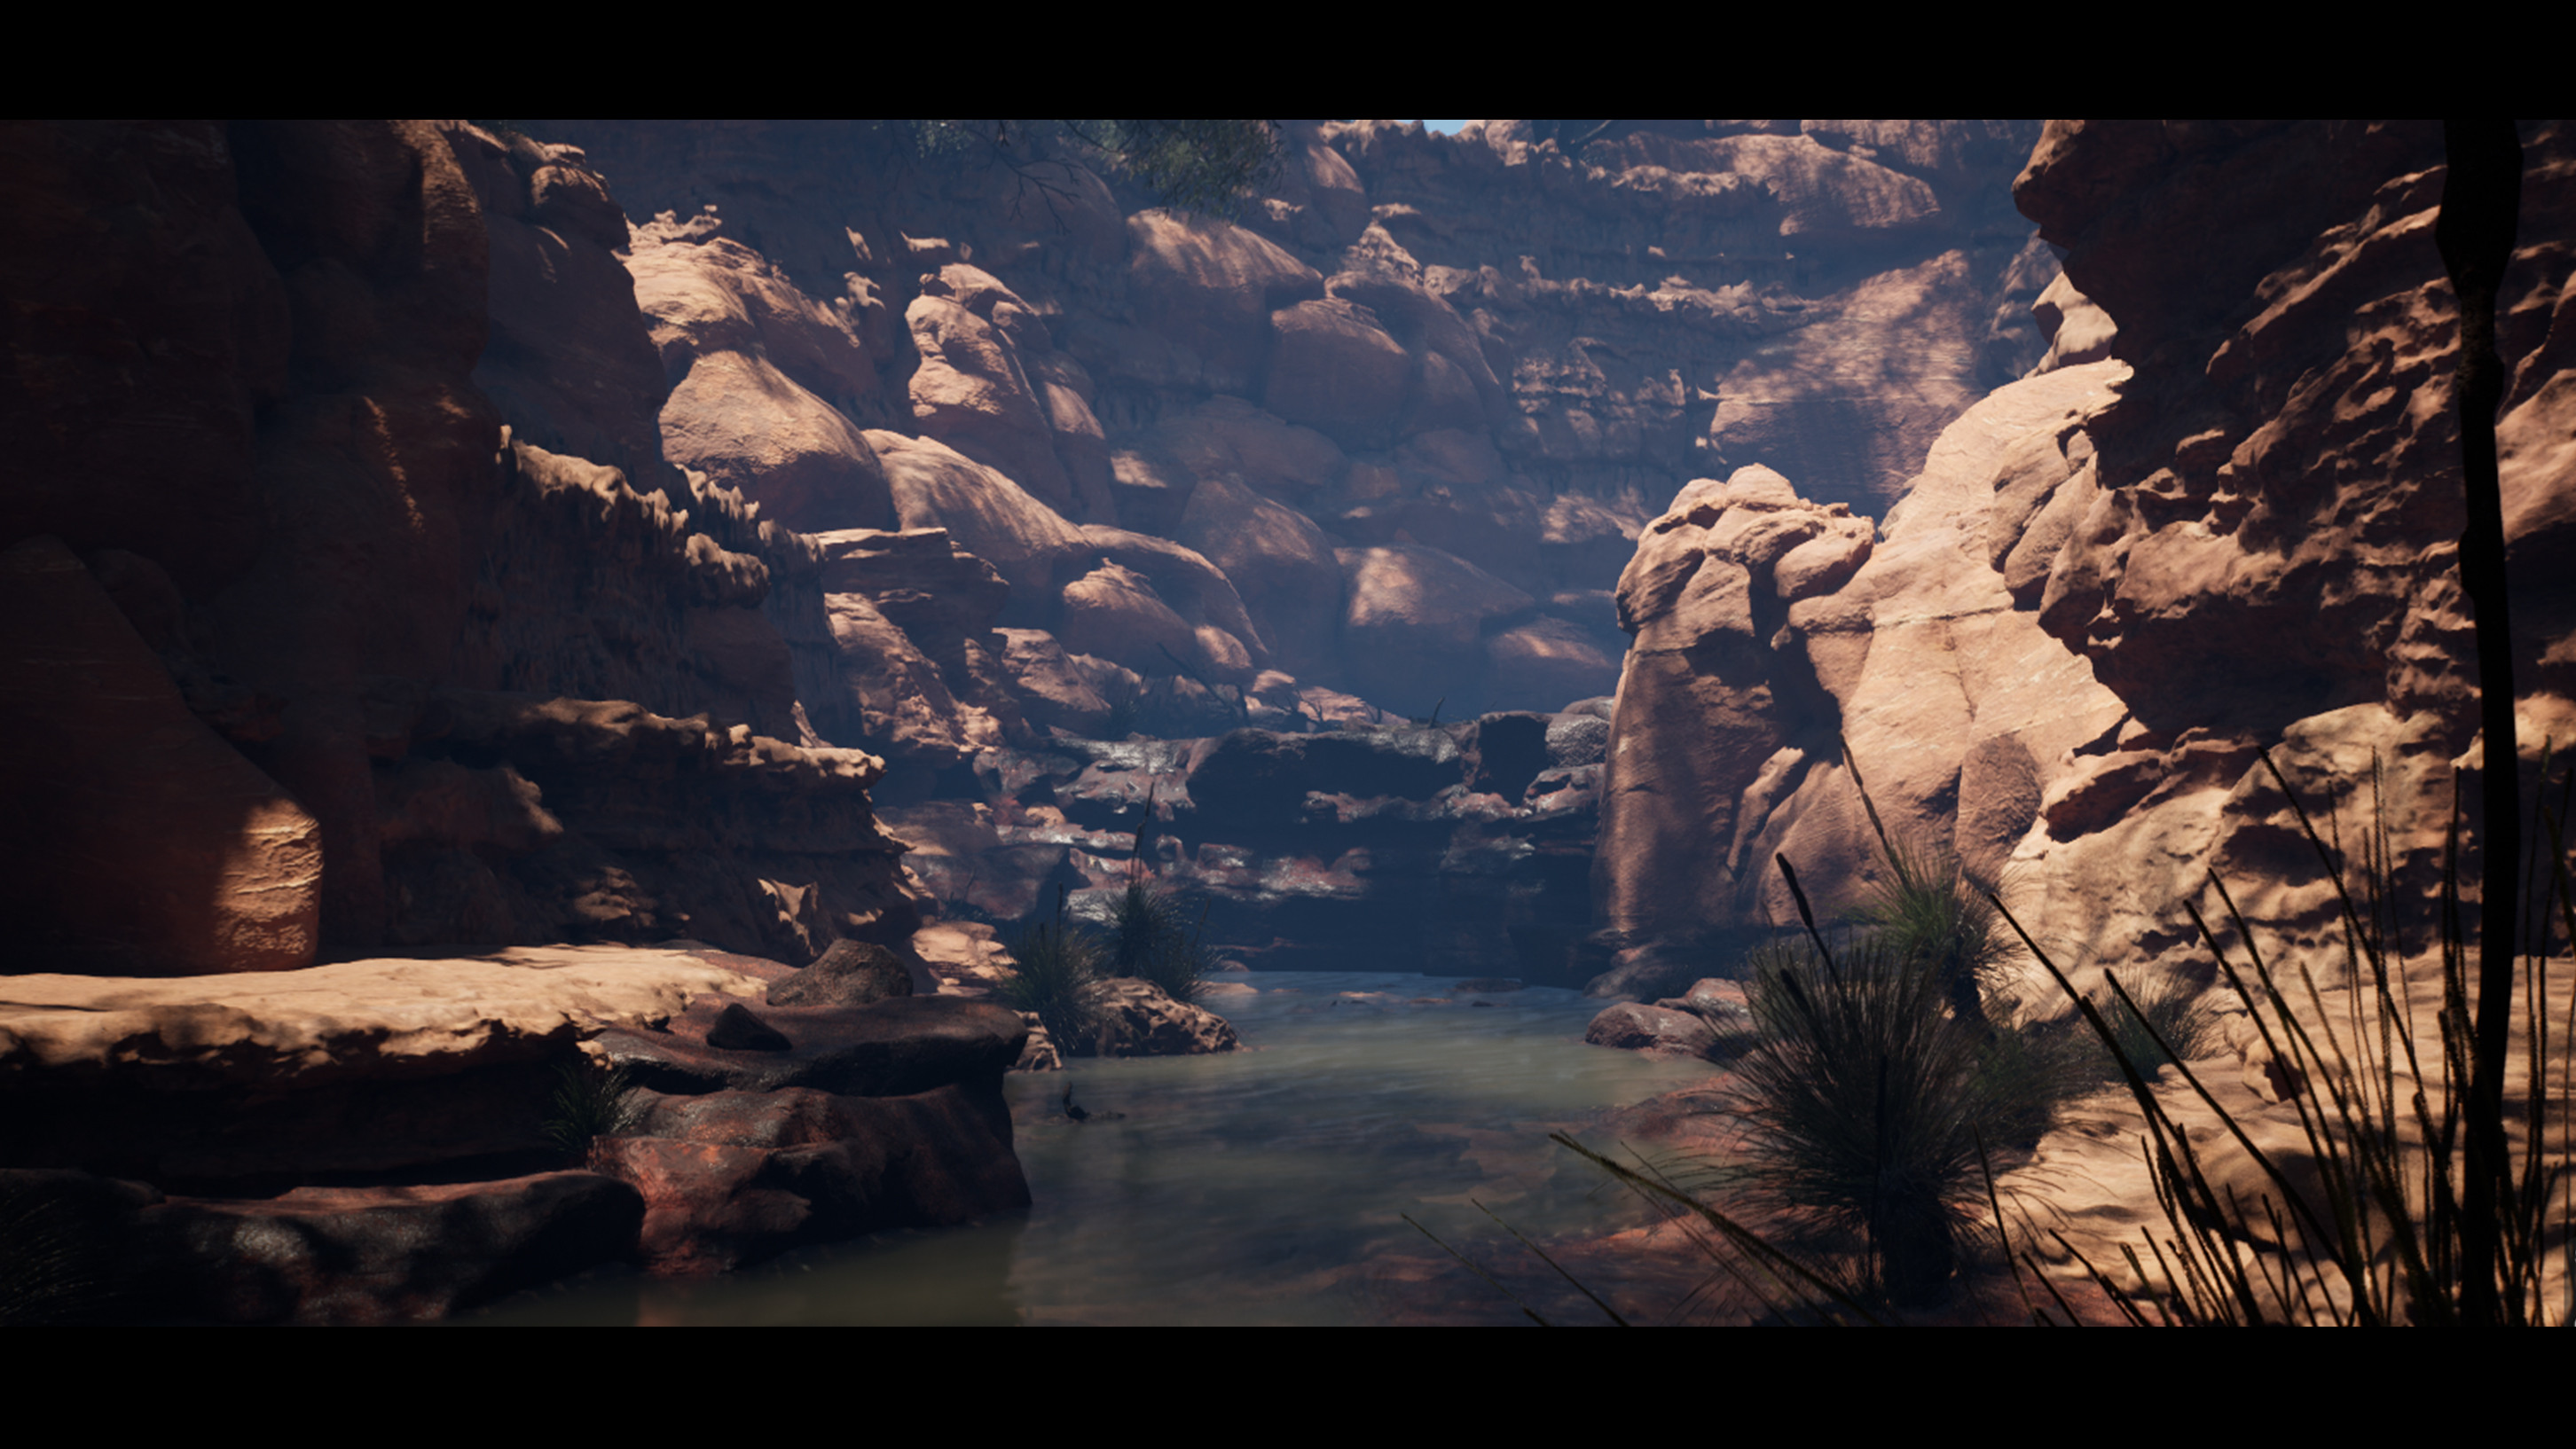 We then start to focus on the mid details, bringing in the smaller vegetation and rocks.